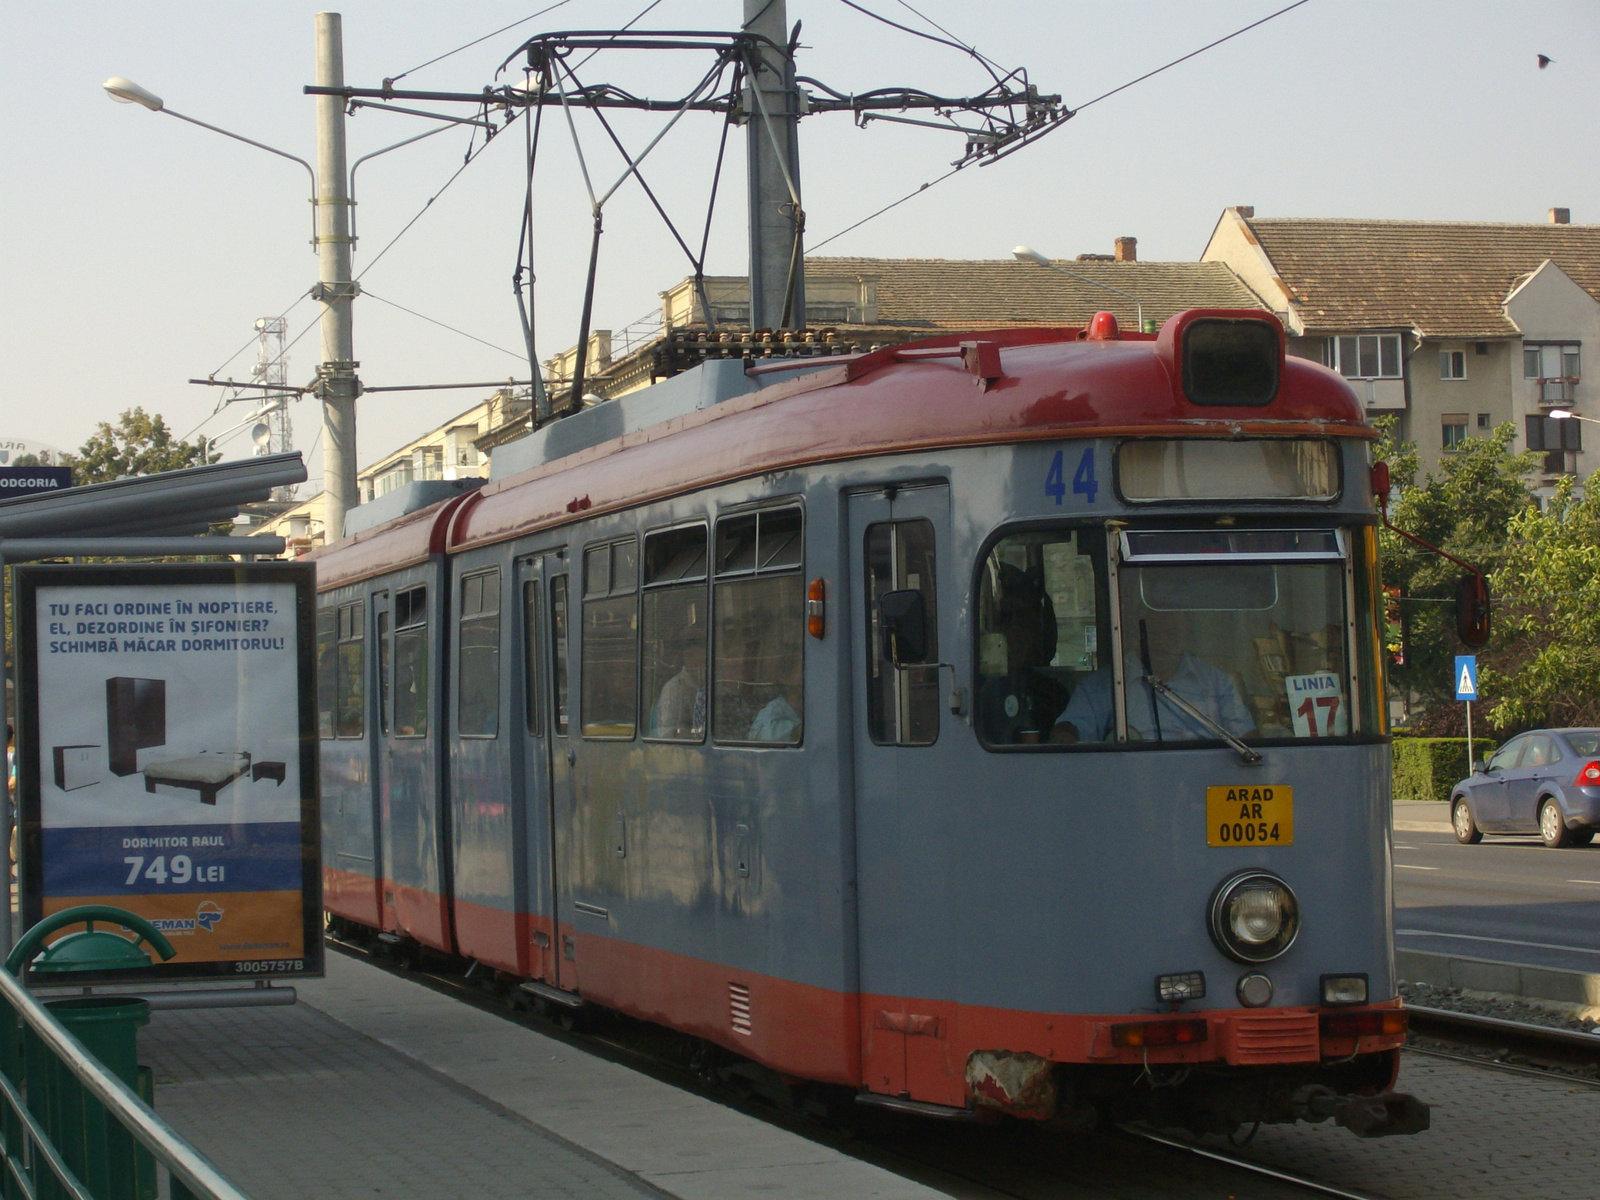 old tram from West Germany